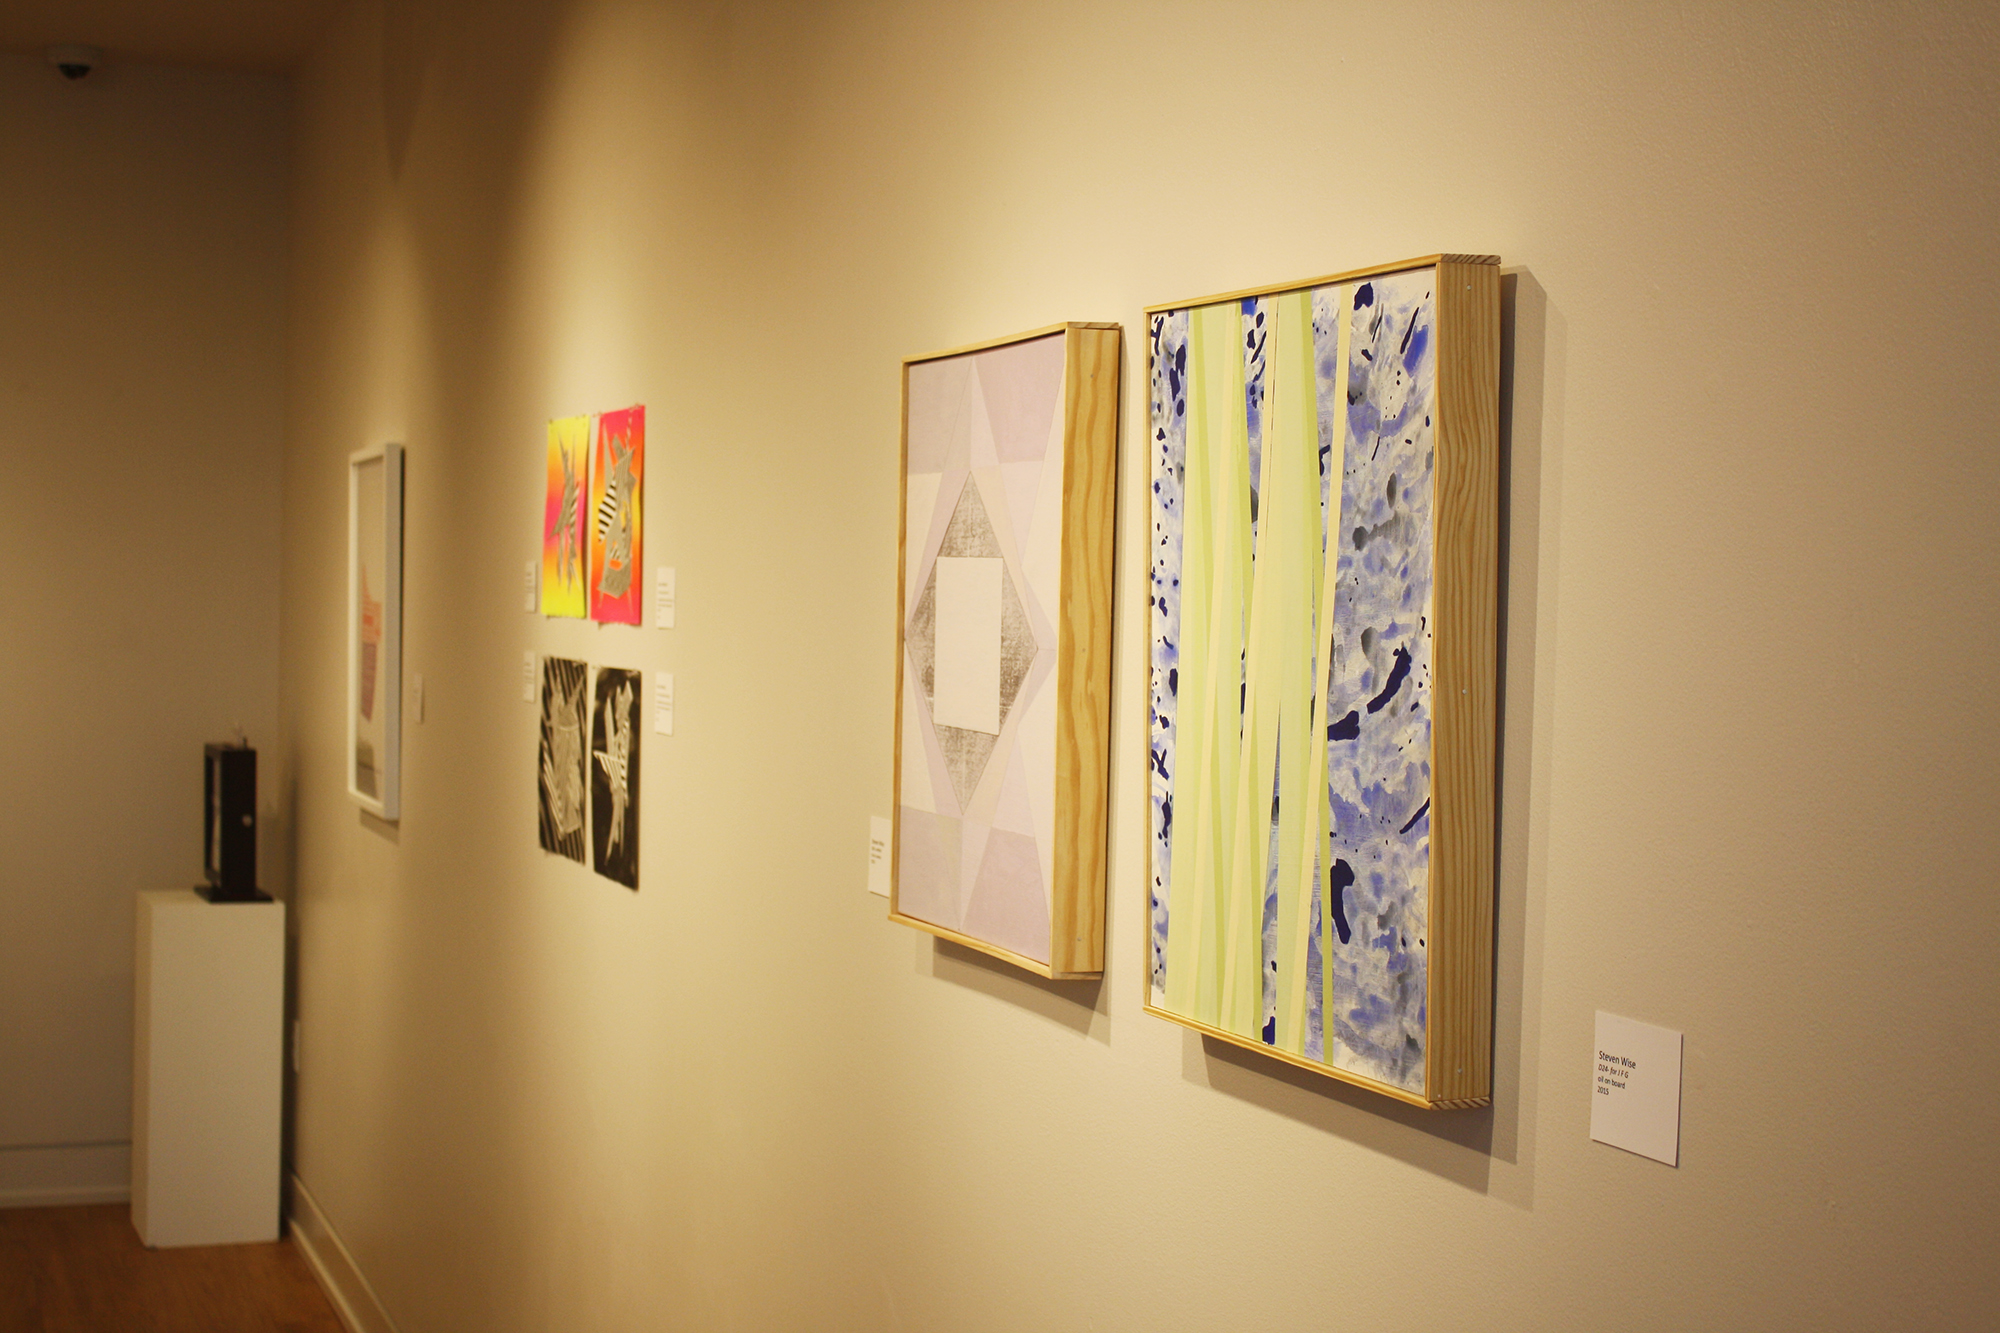  Ouachita Art and Design hosting six area artists in “Abstract ARt” exhibit through March 29.